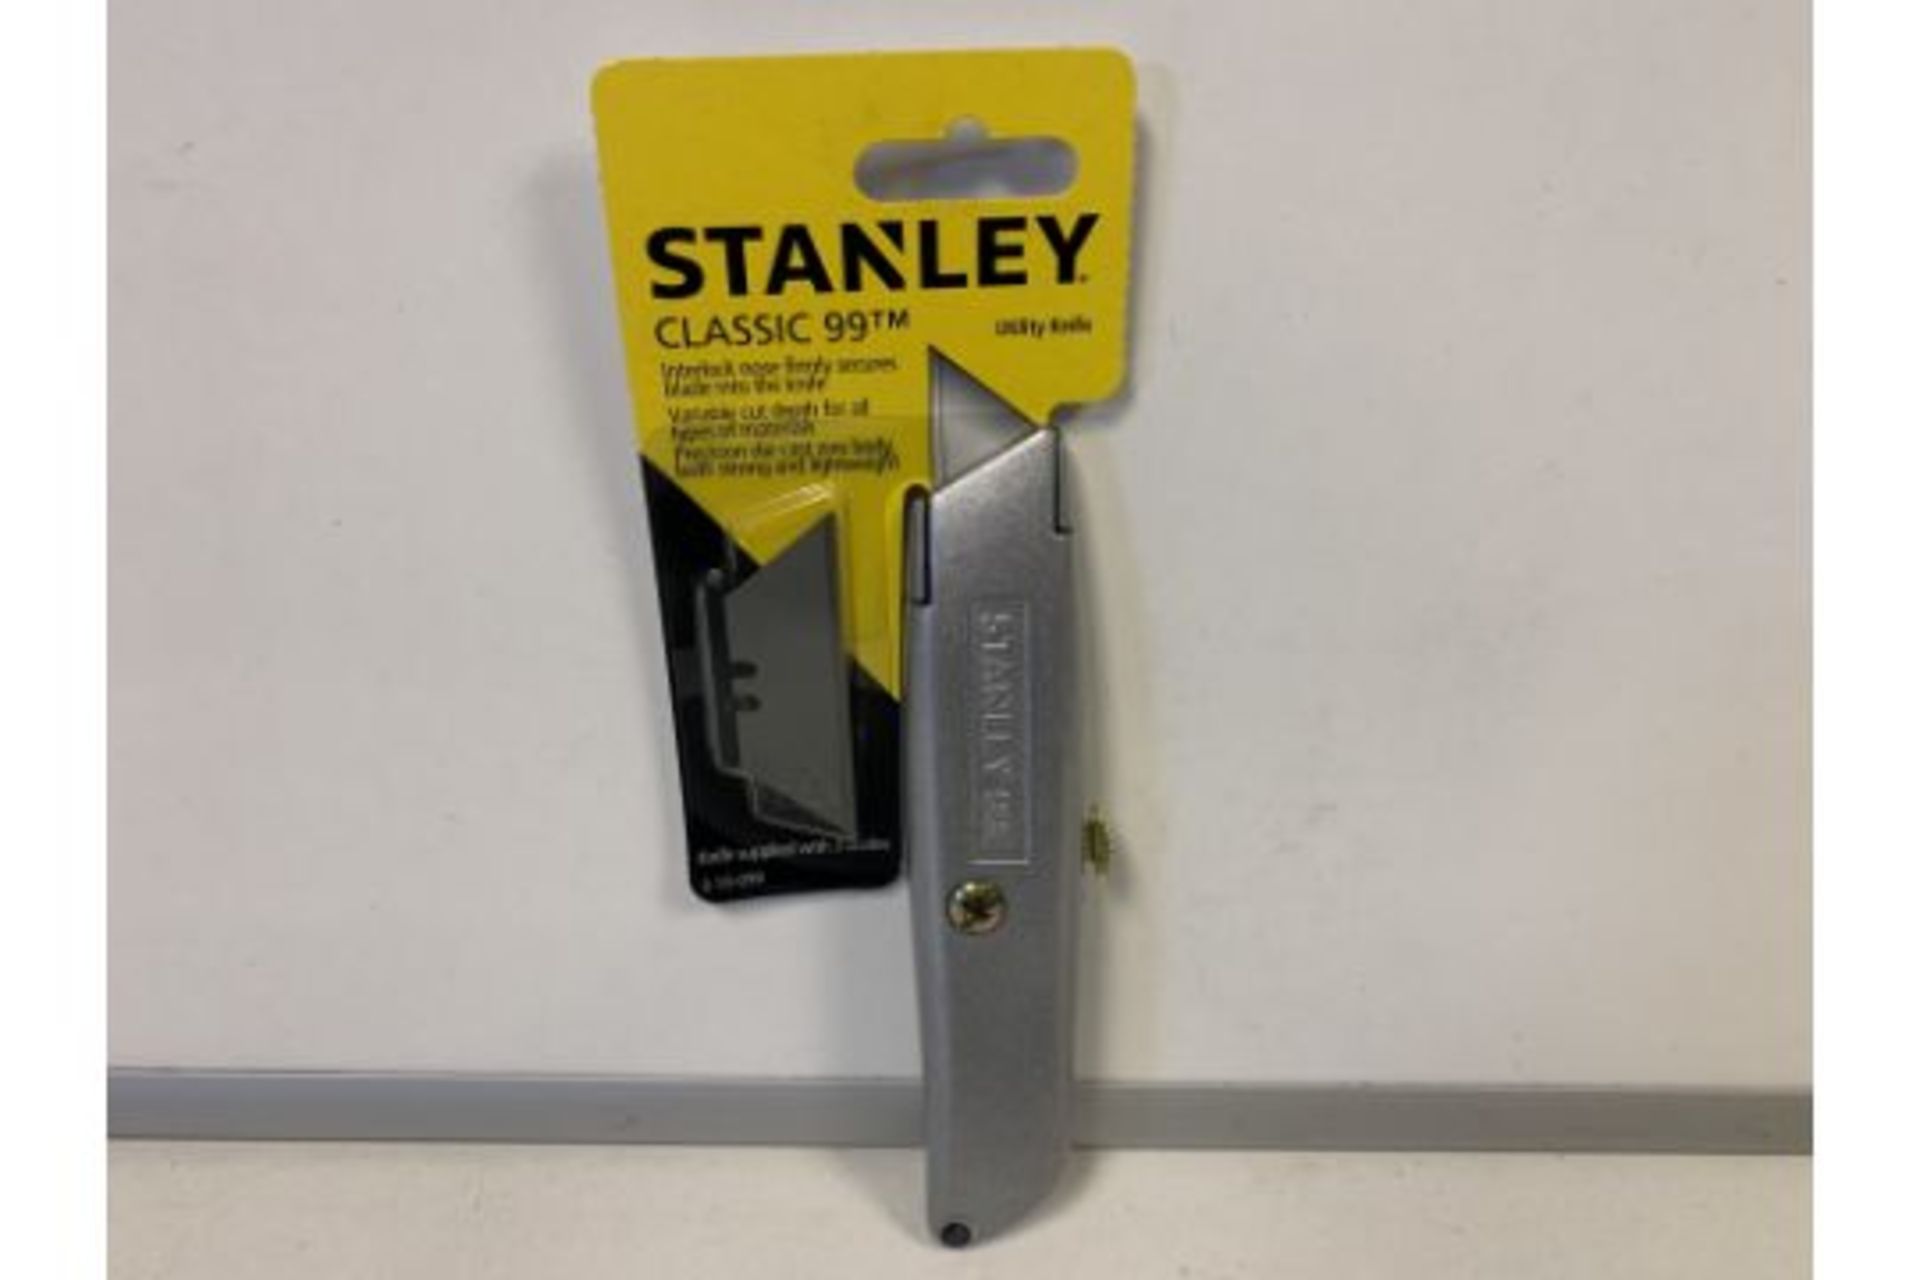 8 x NEW PACKAGED STANLEY CLASSIC 99 KNIFE WITH 3 BLADES (18+ ONLY - ID REQUIRED) (1158/13)